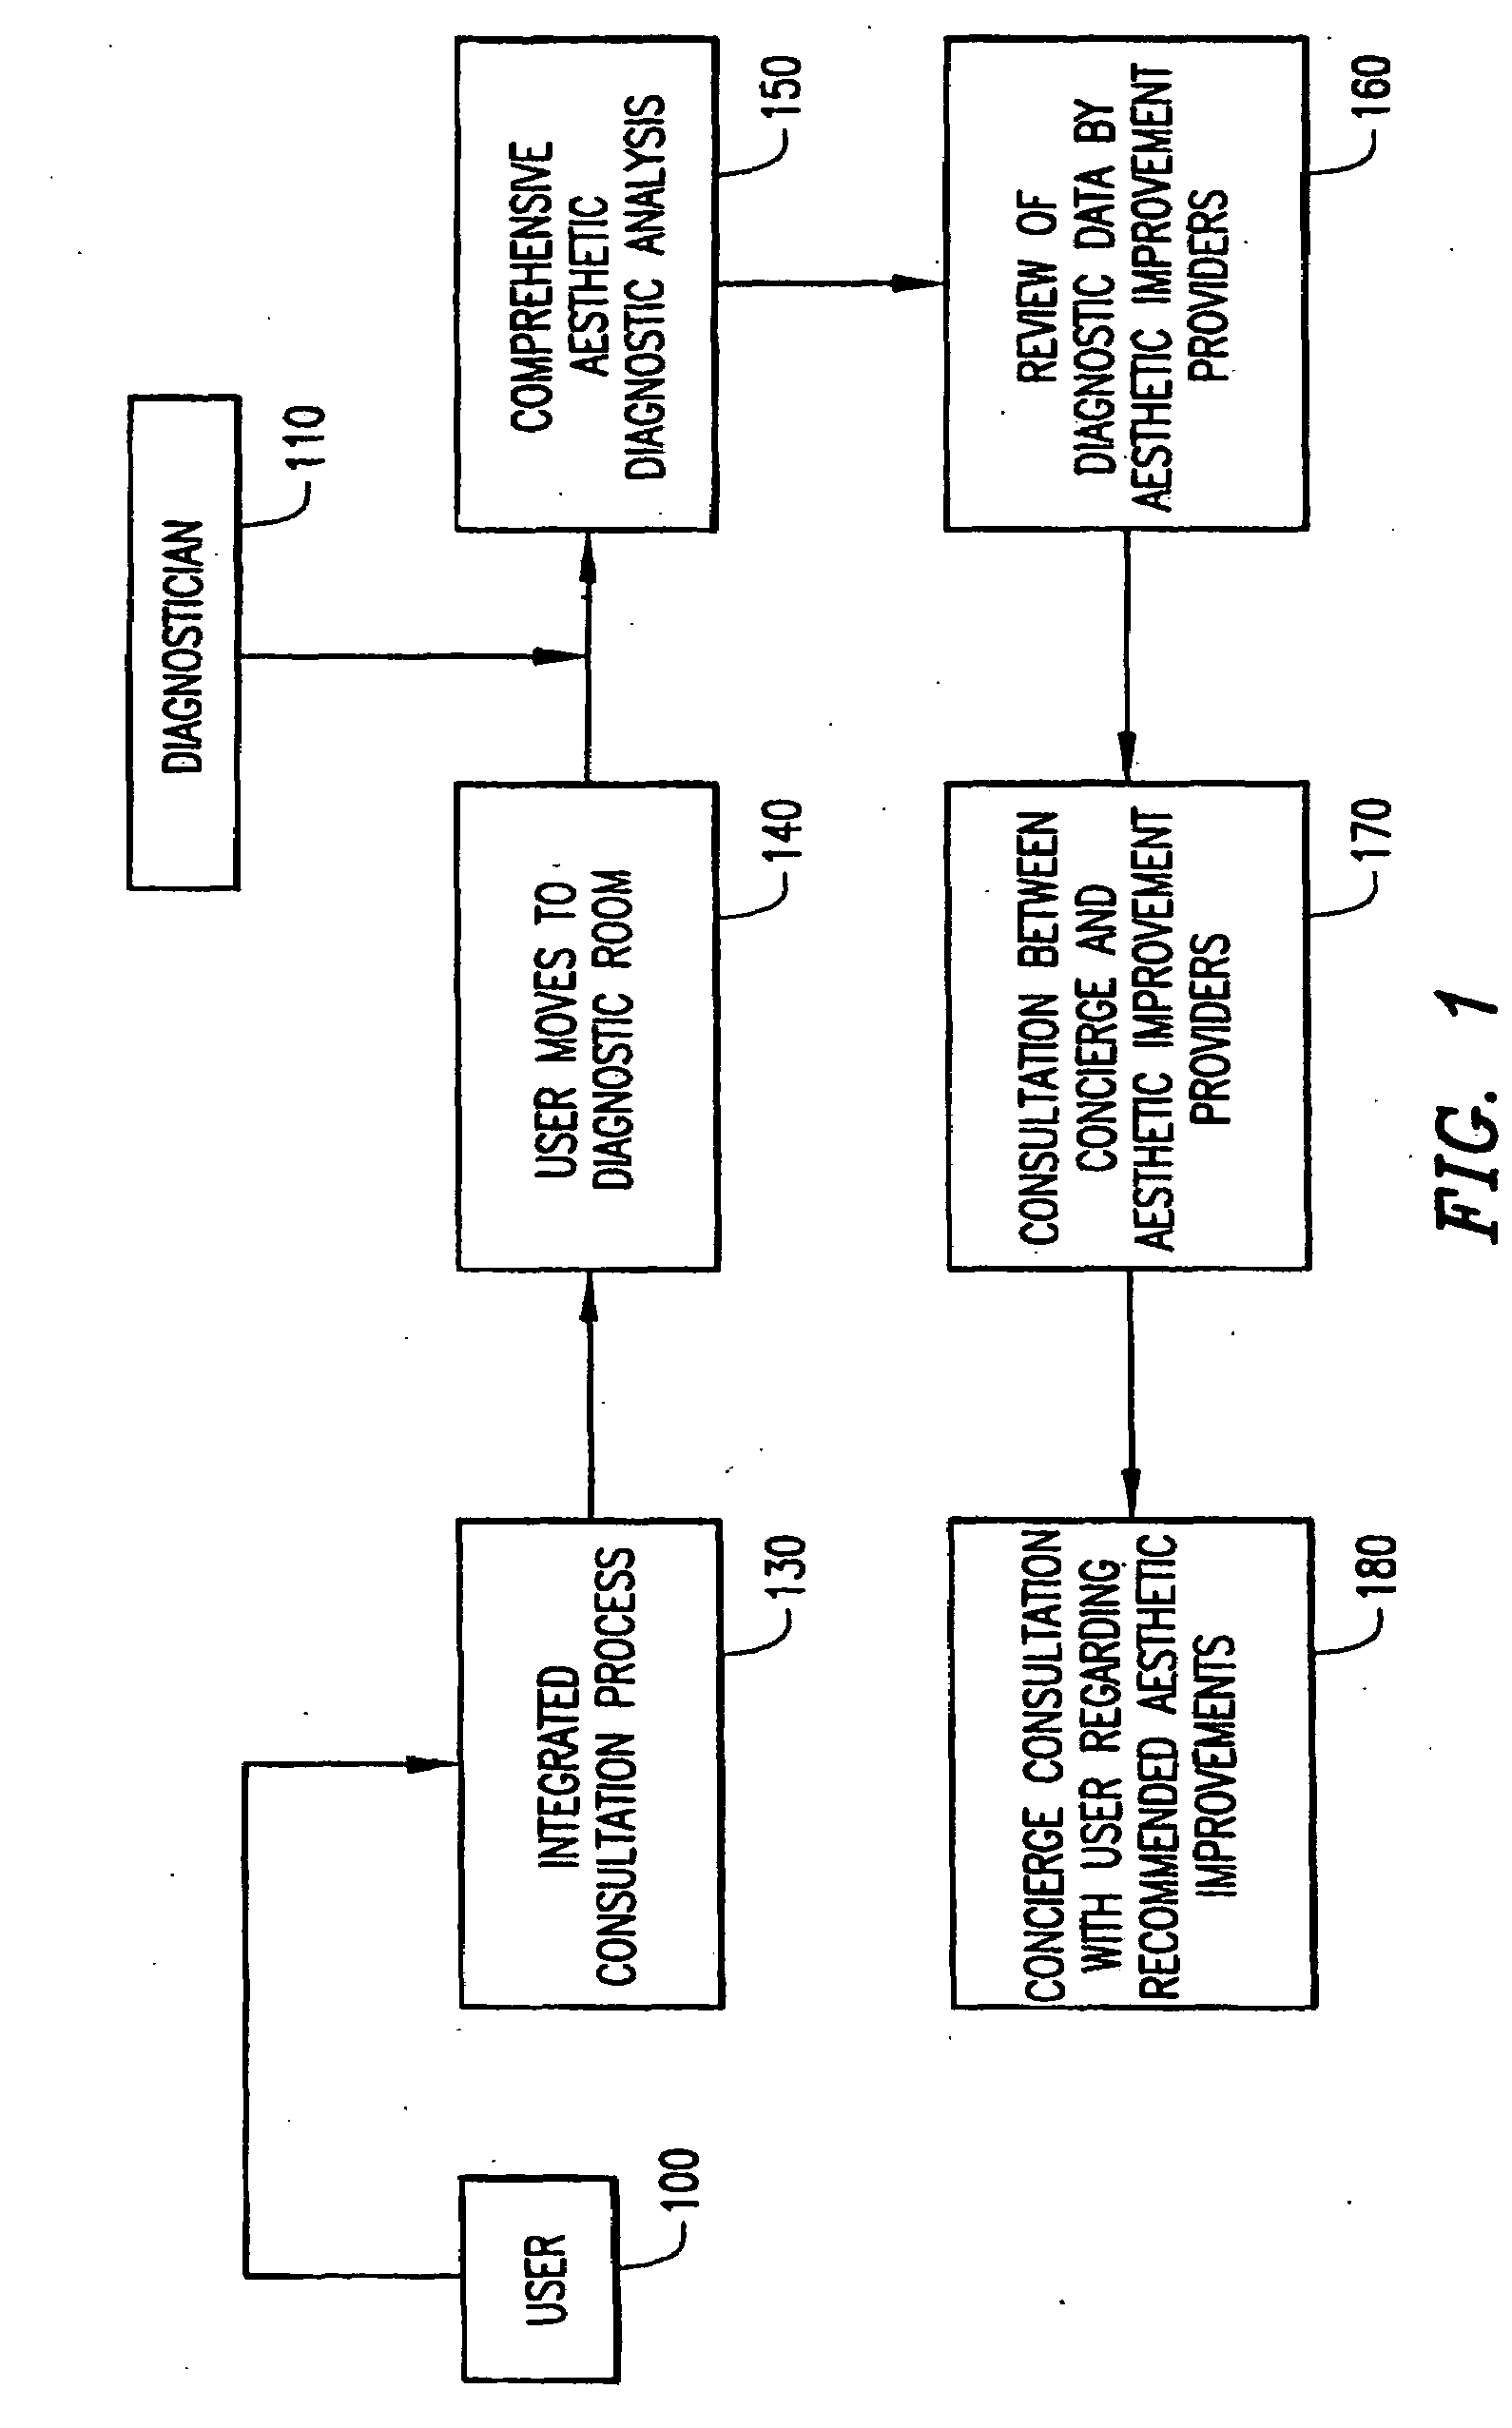 Systems and methods using a dynamic expert system to provide patients with aesthetic improvement procedures